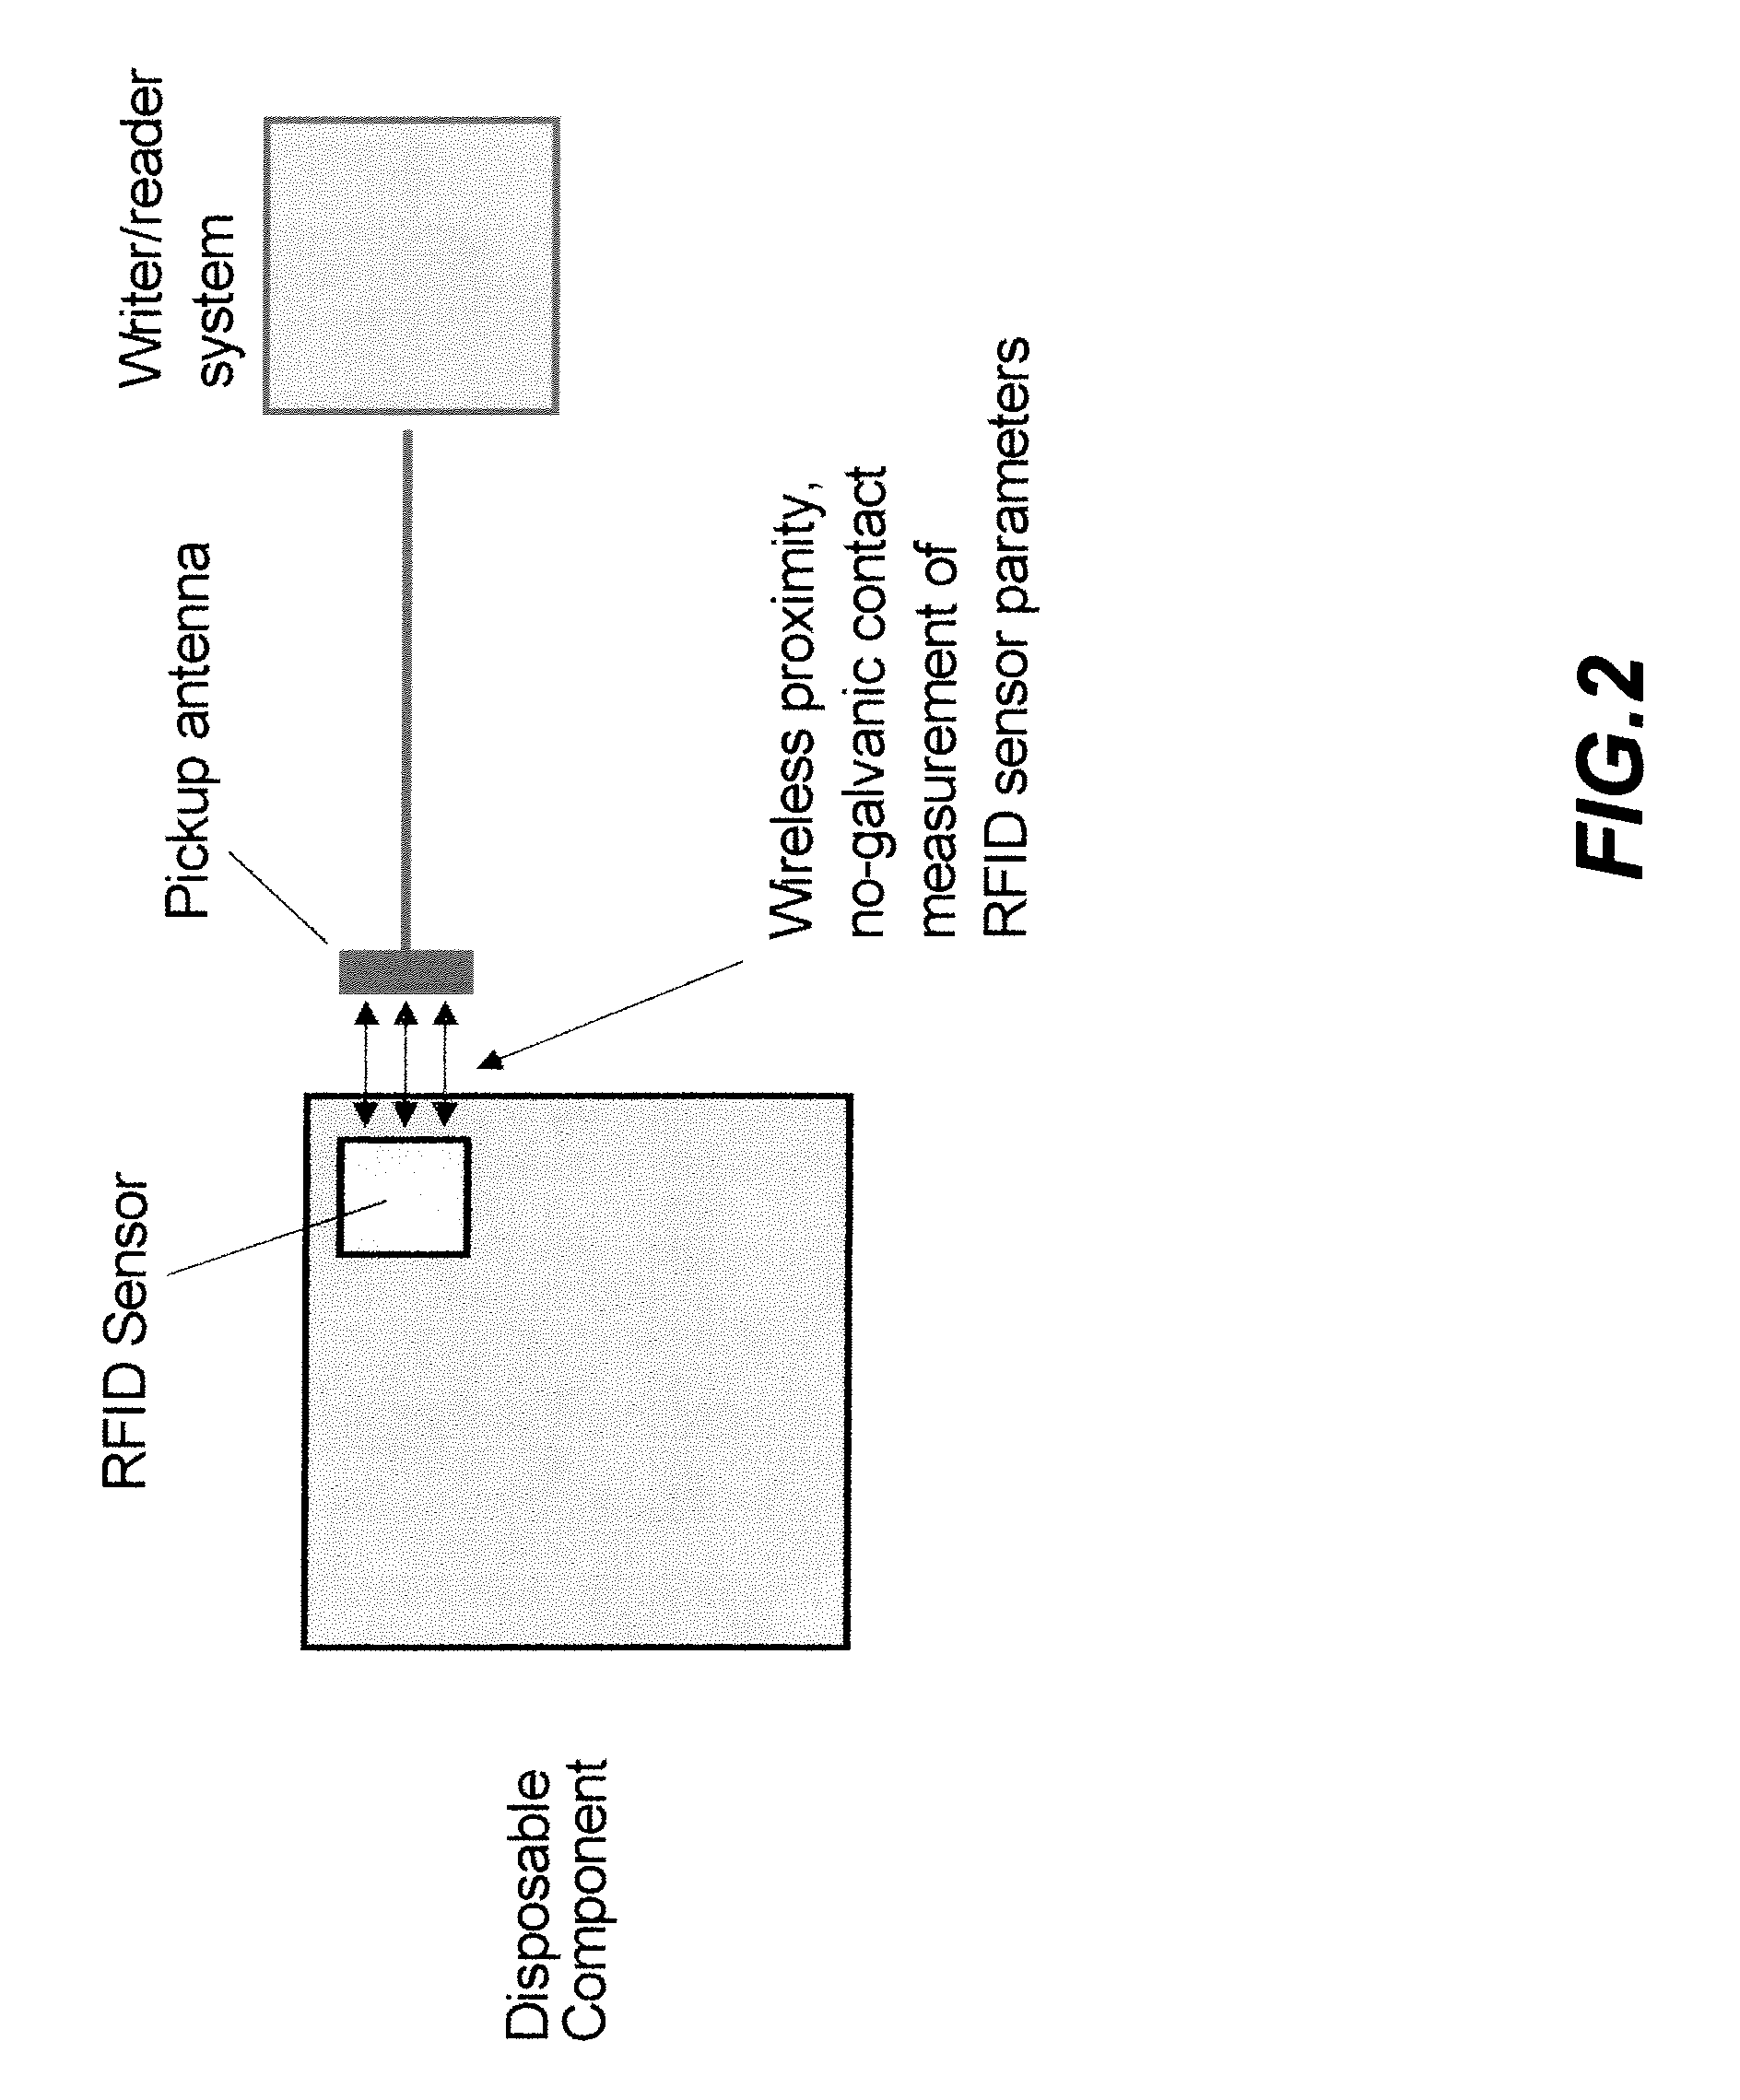 System and method for integrating RFID sensors in manufacturing system comprising single use components